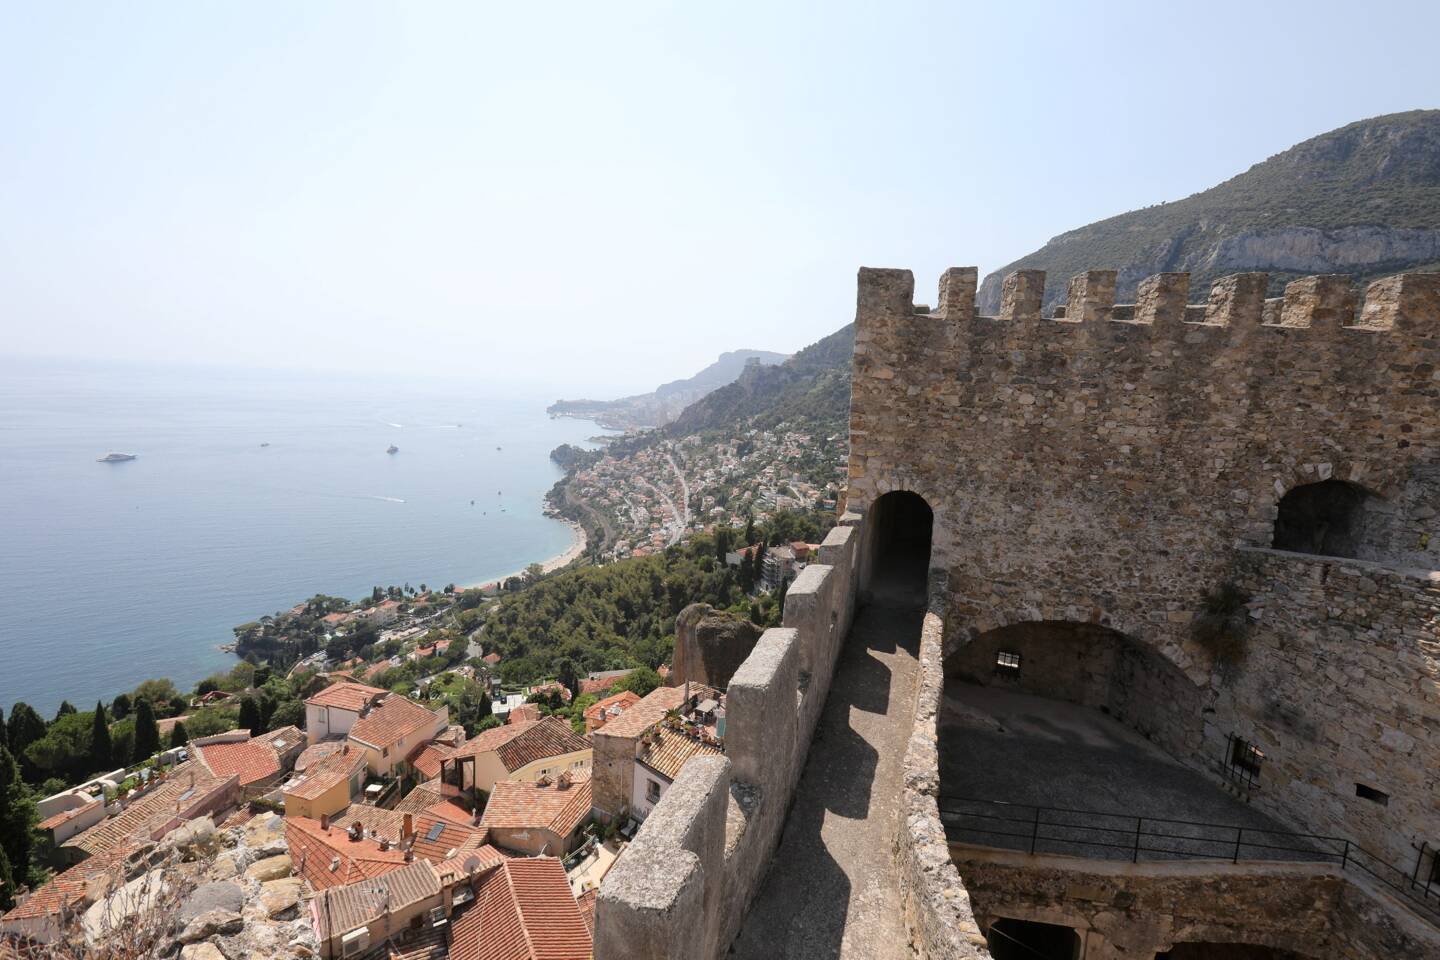 The view from the castle of Roquebrune Cap Martin is one of the 32 panoramas in the competition.  It's up to you to vote!